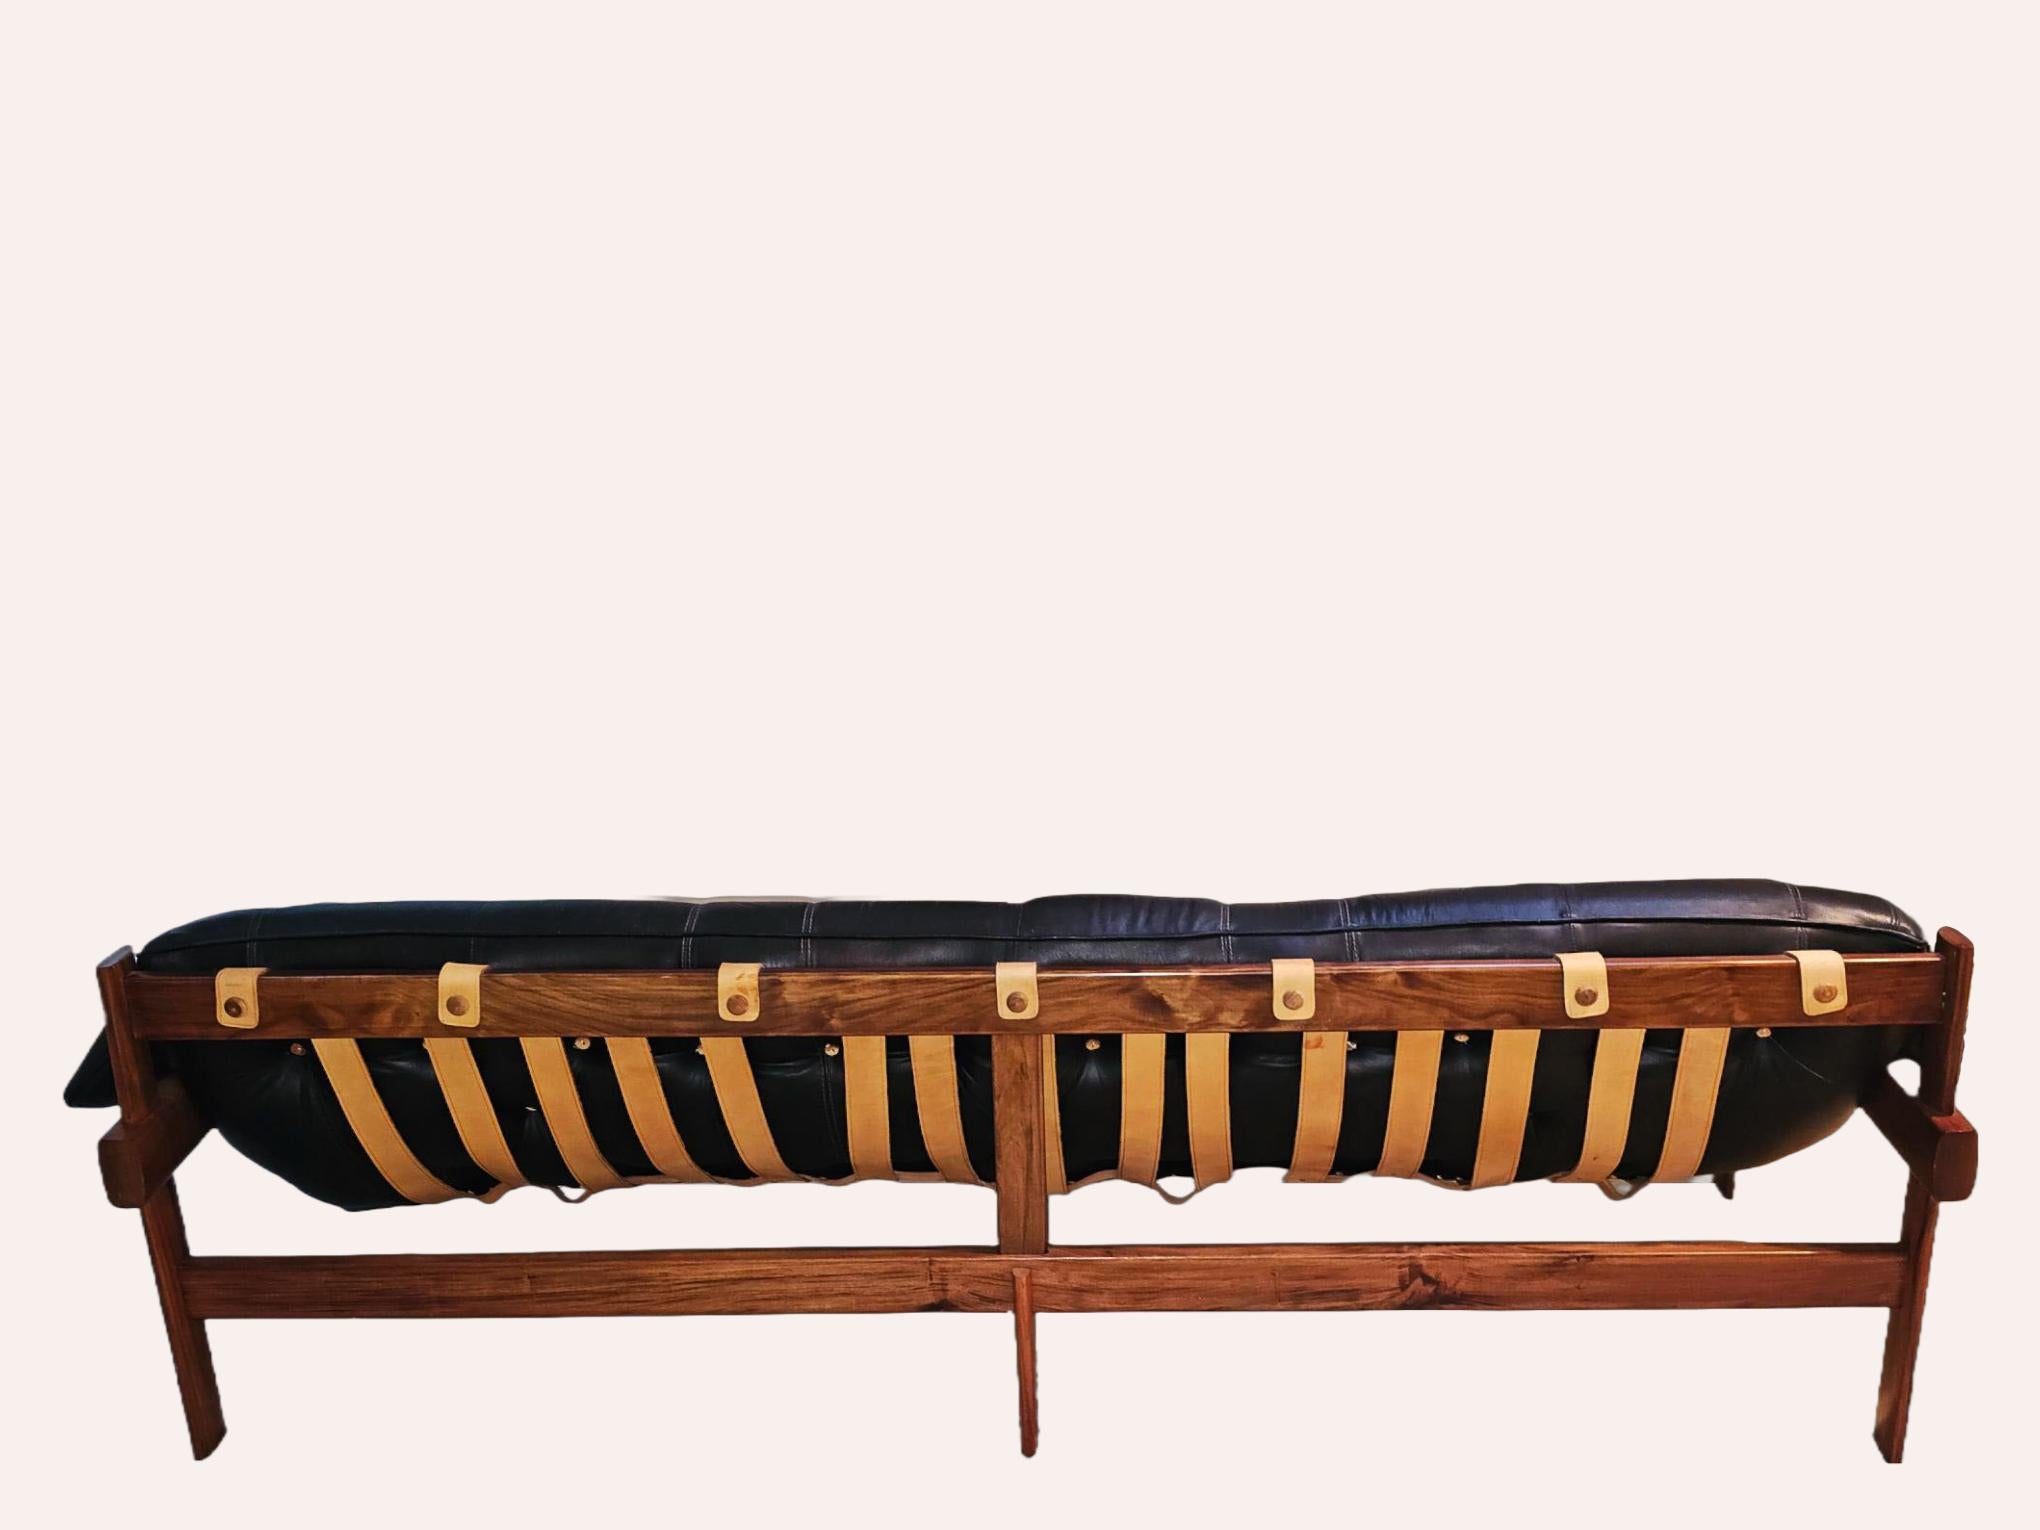 This is our stunning MP-41 three seater sofa in original black leather and jacaranda (Brazilian Rosewood) wood frame. The jacaranda is known as one of the most beautiful woods in the world. This piece was designed by Percival Lafer for MP Lafer,